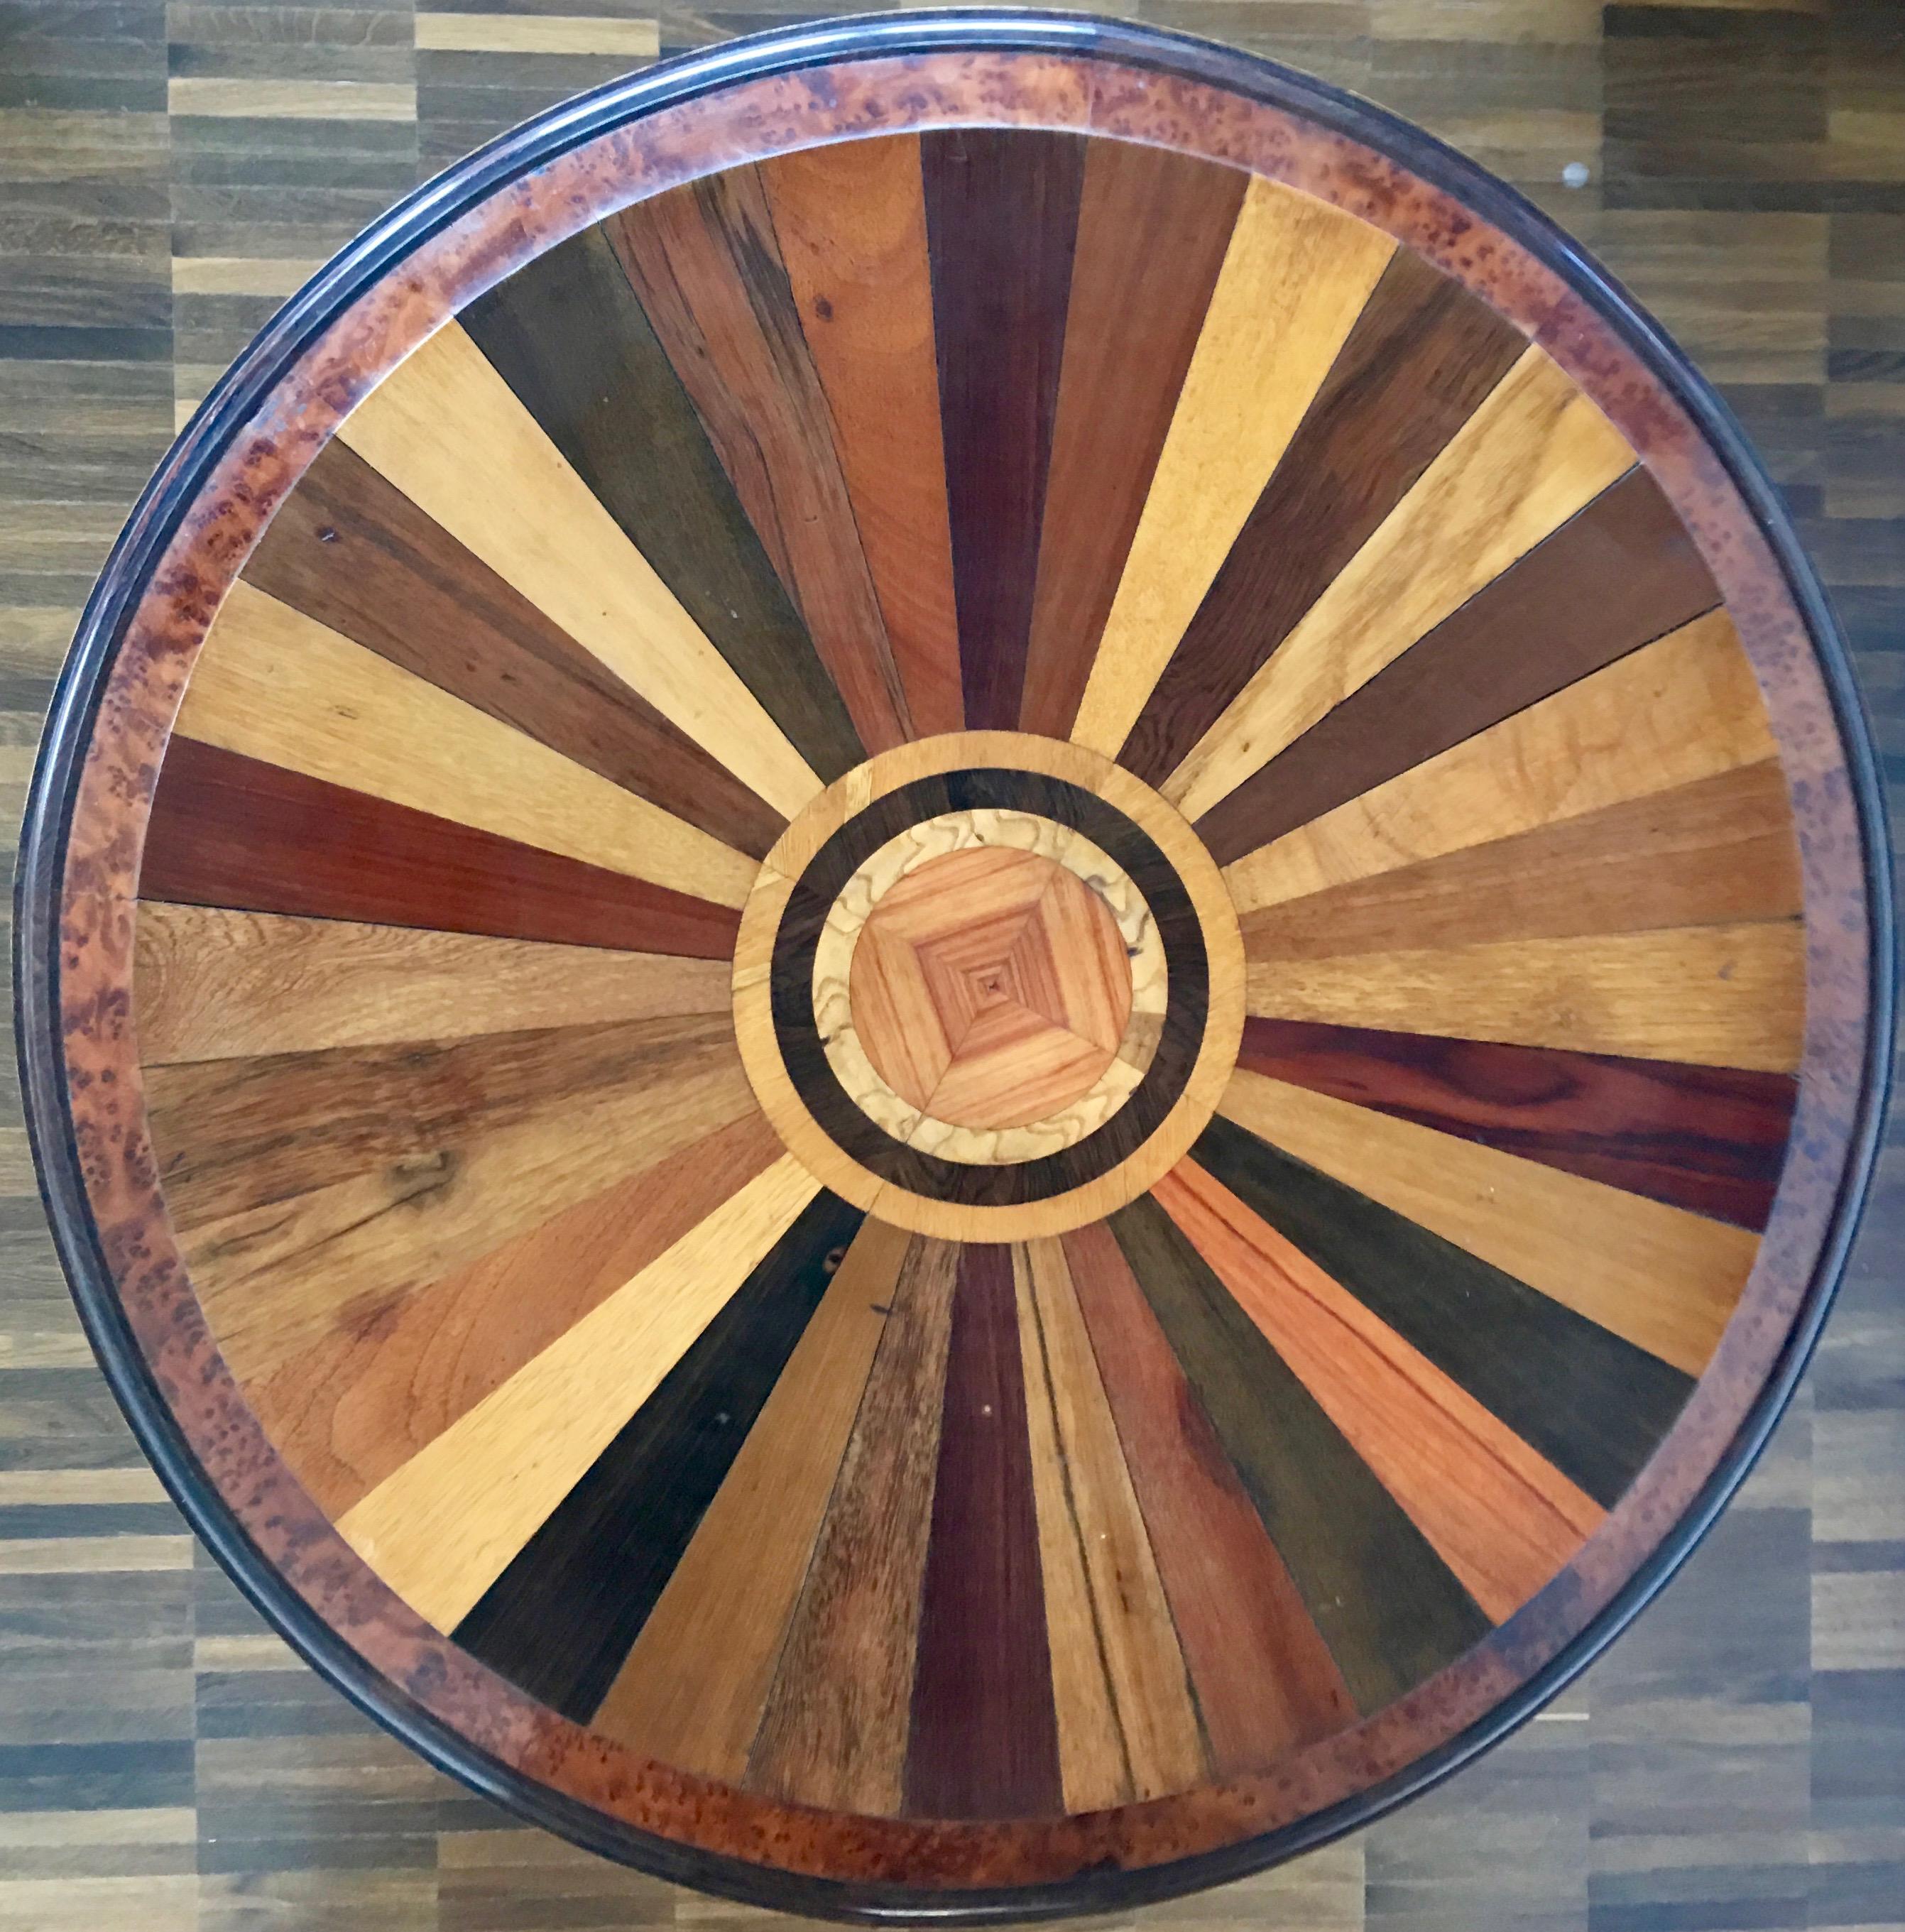 French Cabinetmaker showroom roundtable, second half of the 19th century.
A very high-quality side table; the round top veneered with approximately 35 different types of wood is sitting on a turned ebonized and burl walnut veneered center pedestal